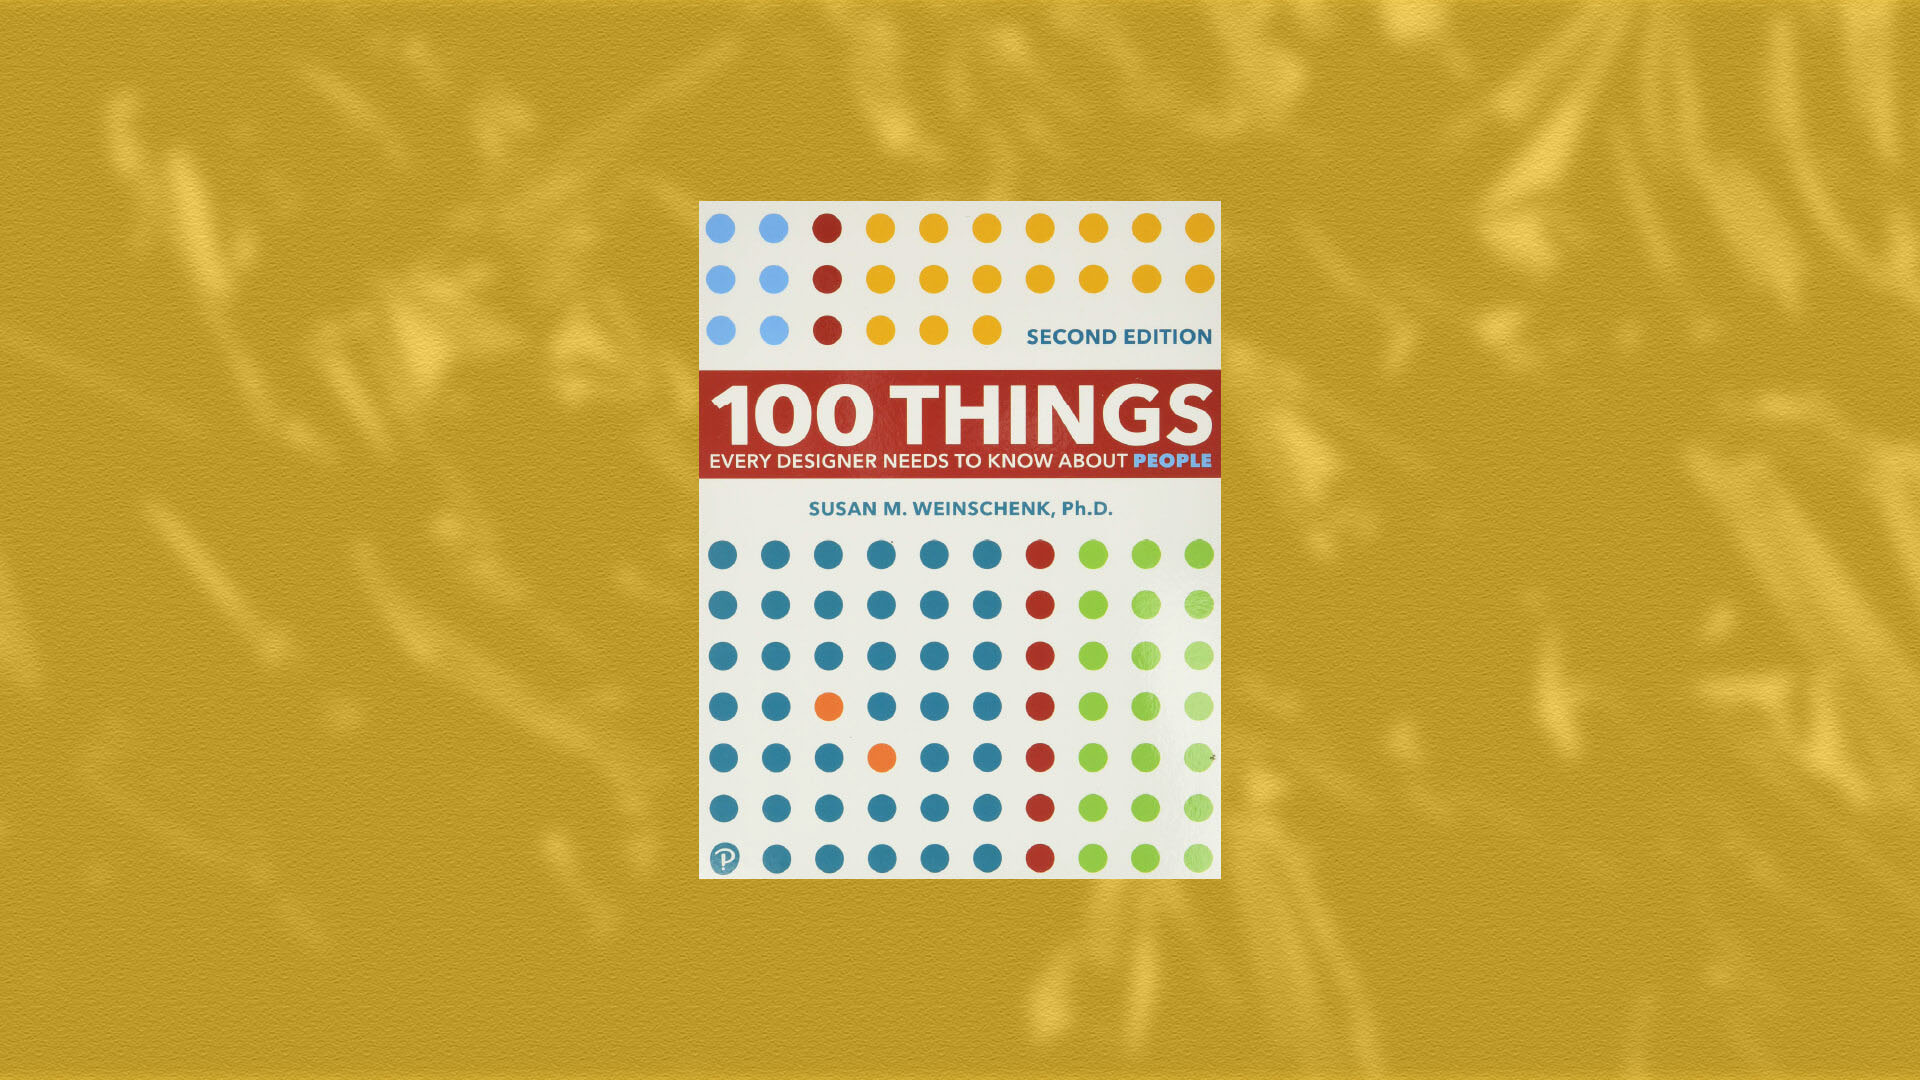 Product design books - 100 Things